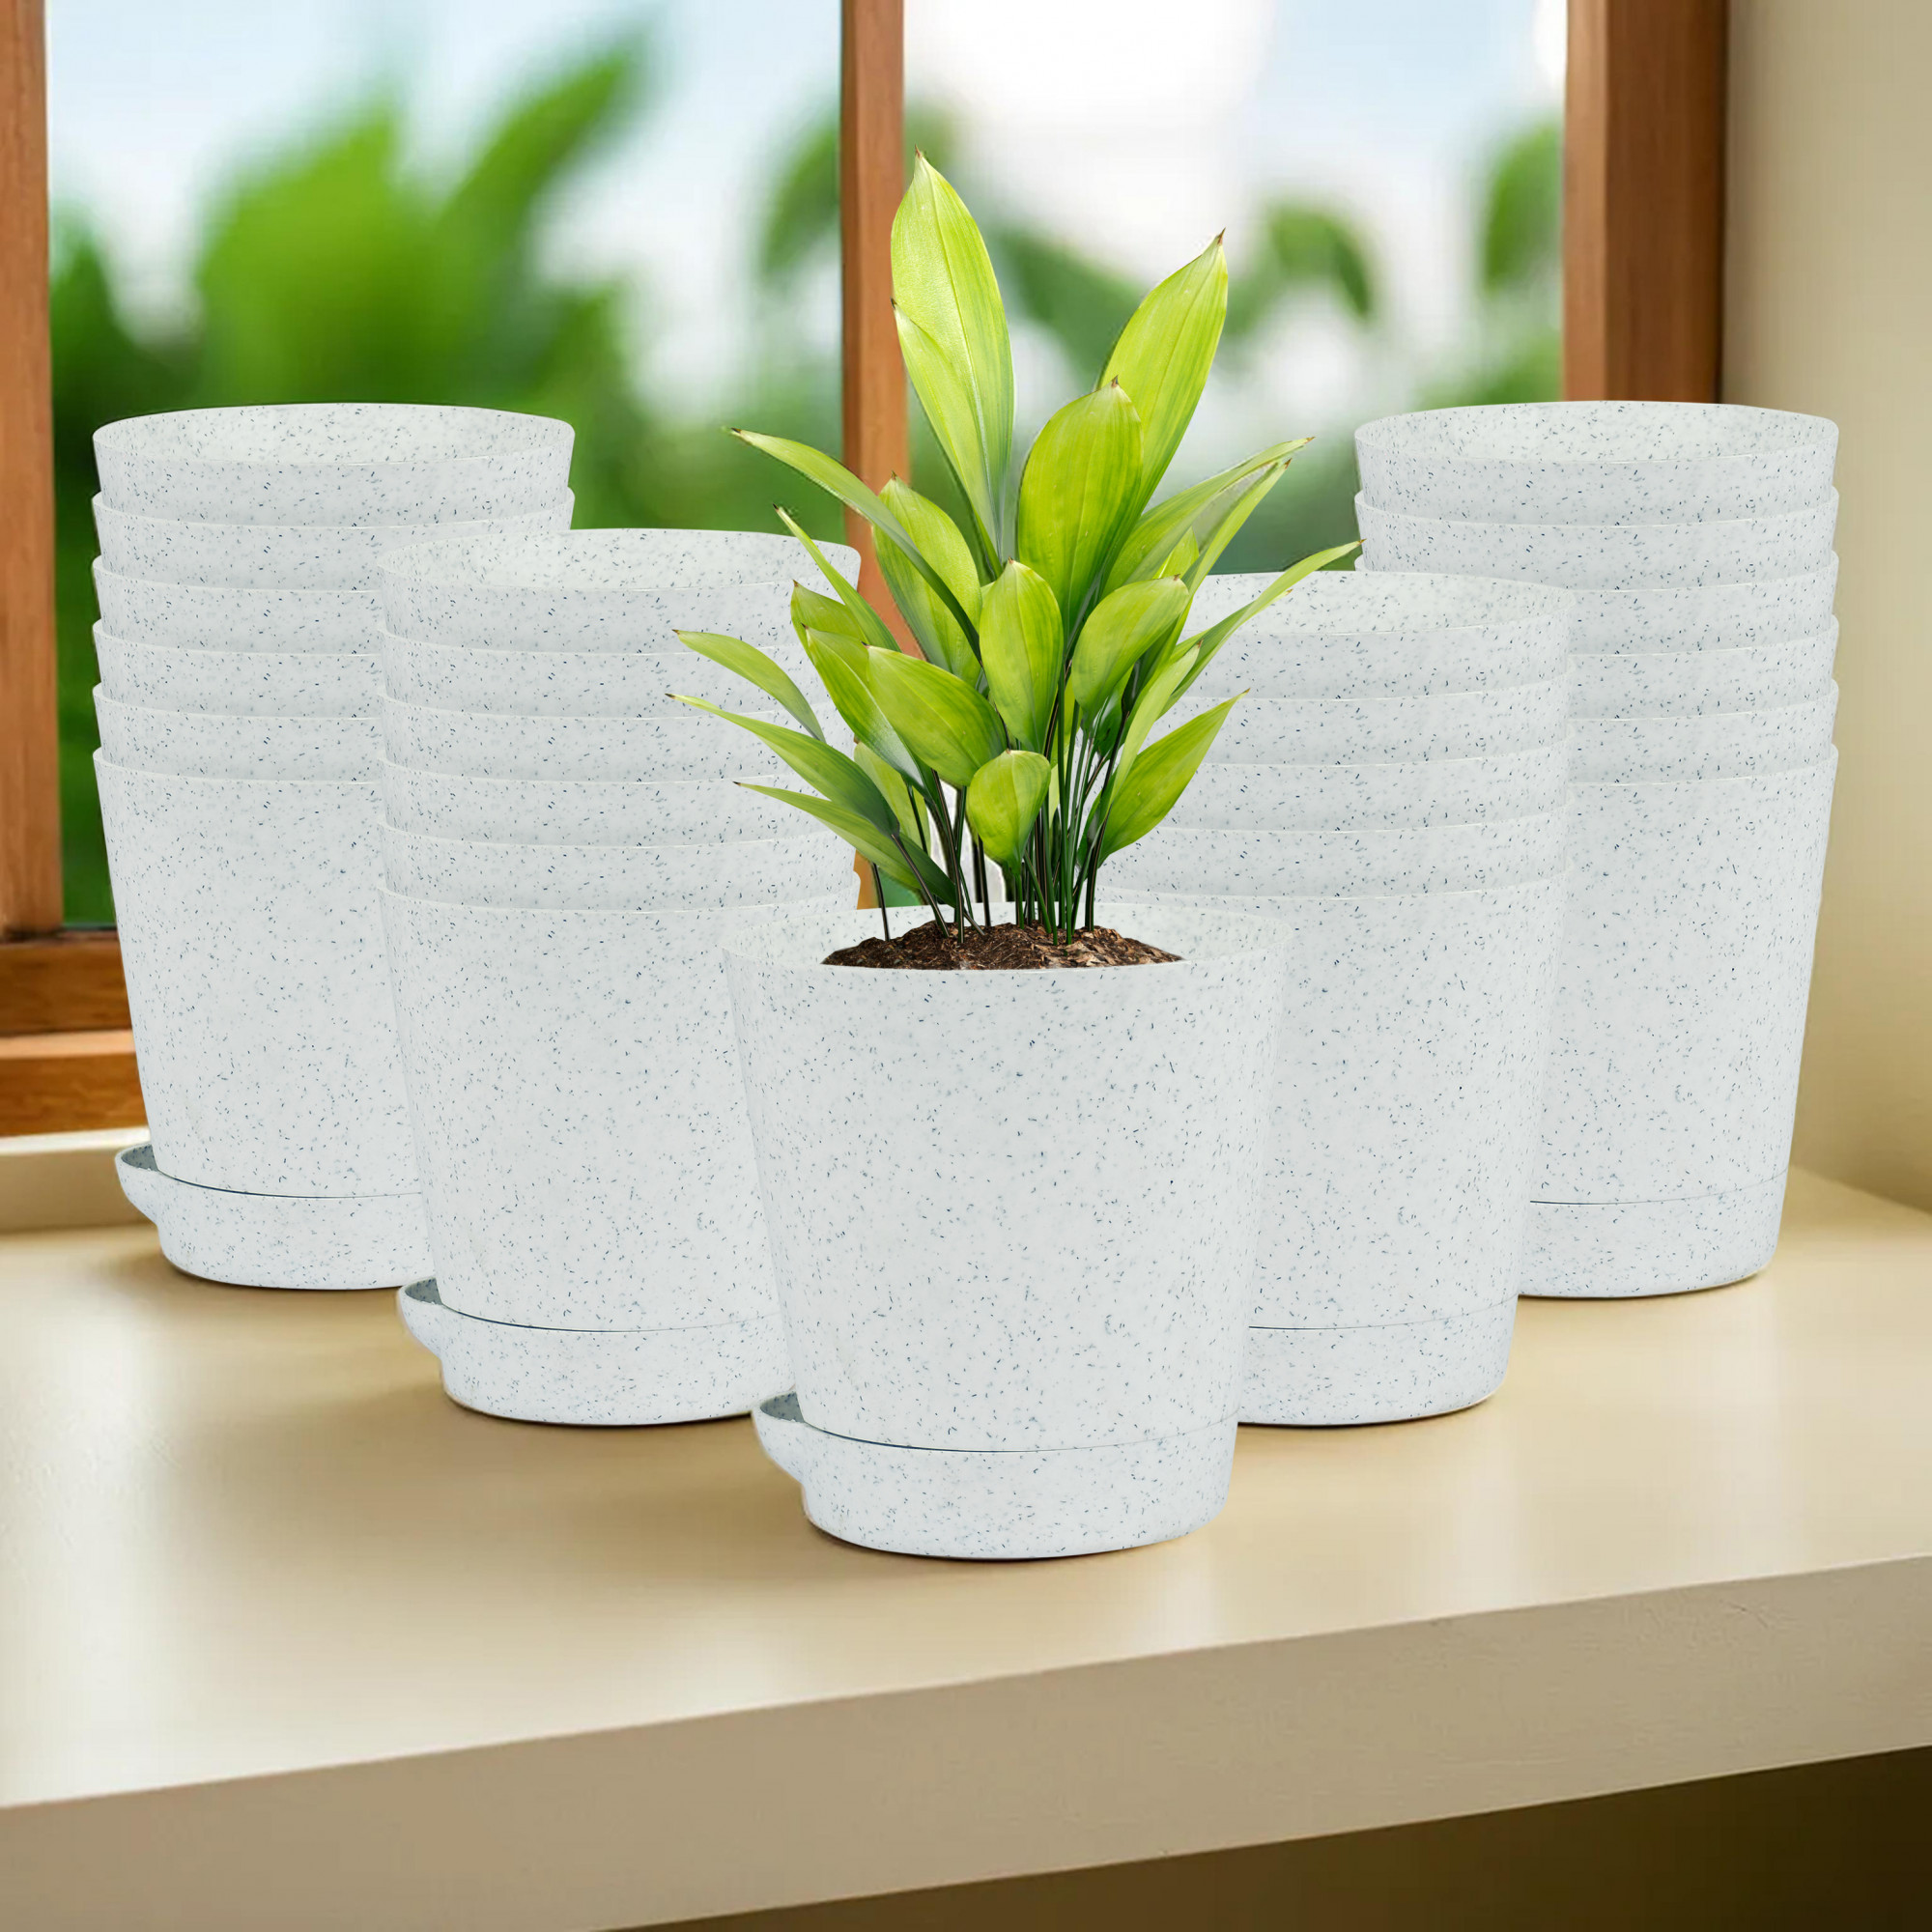 Kuber Industries Flower Pot | Flower Pot for Living Room-Office | Flower Planters for Home-office-Lawns & Garden Décor | Self Watering Flower Planters Pots | Marble Titan | 4 Inch | White